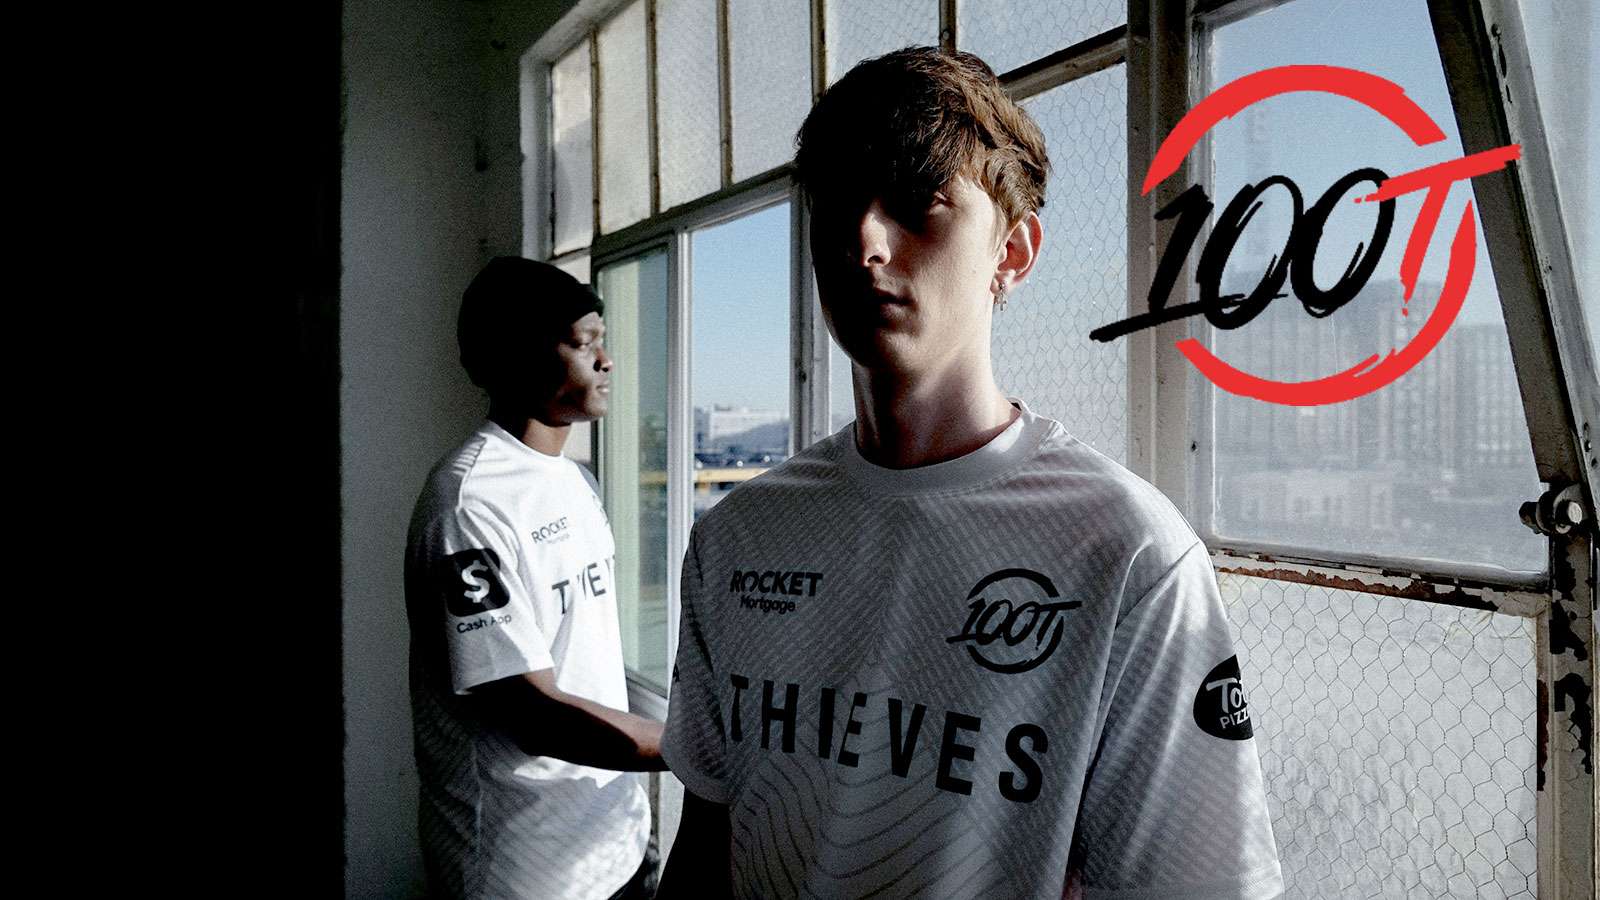 Liazz and Avalanche in 100 Thieves white 2020 jersey.